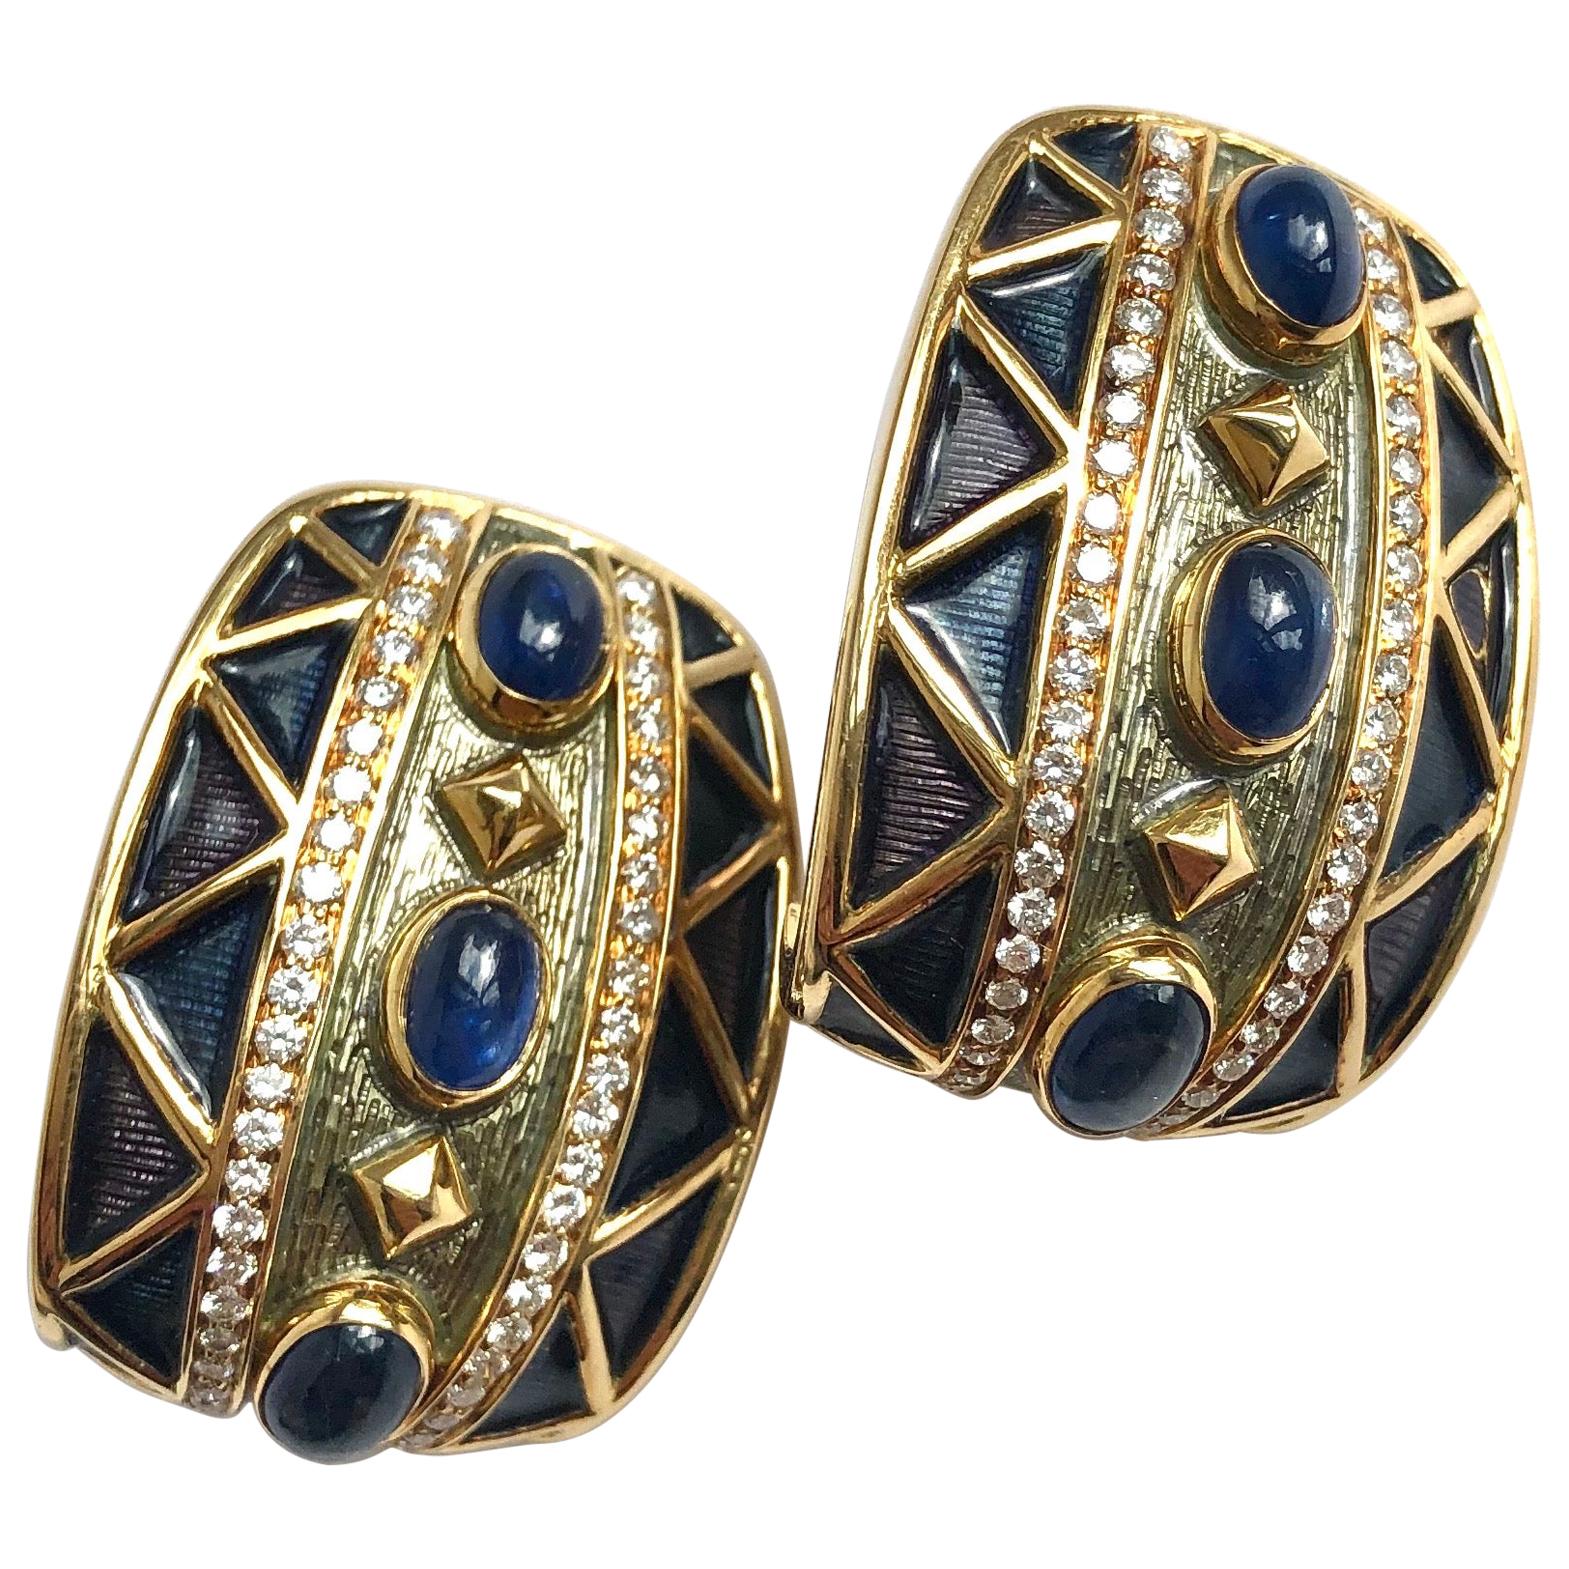 AMR Shaker Sapphire Cabochon, Diamond and 18 Carat Gold Earrings